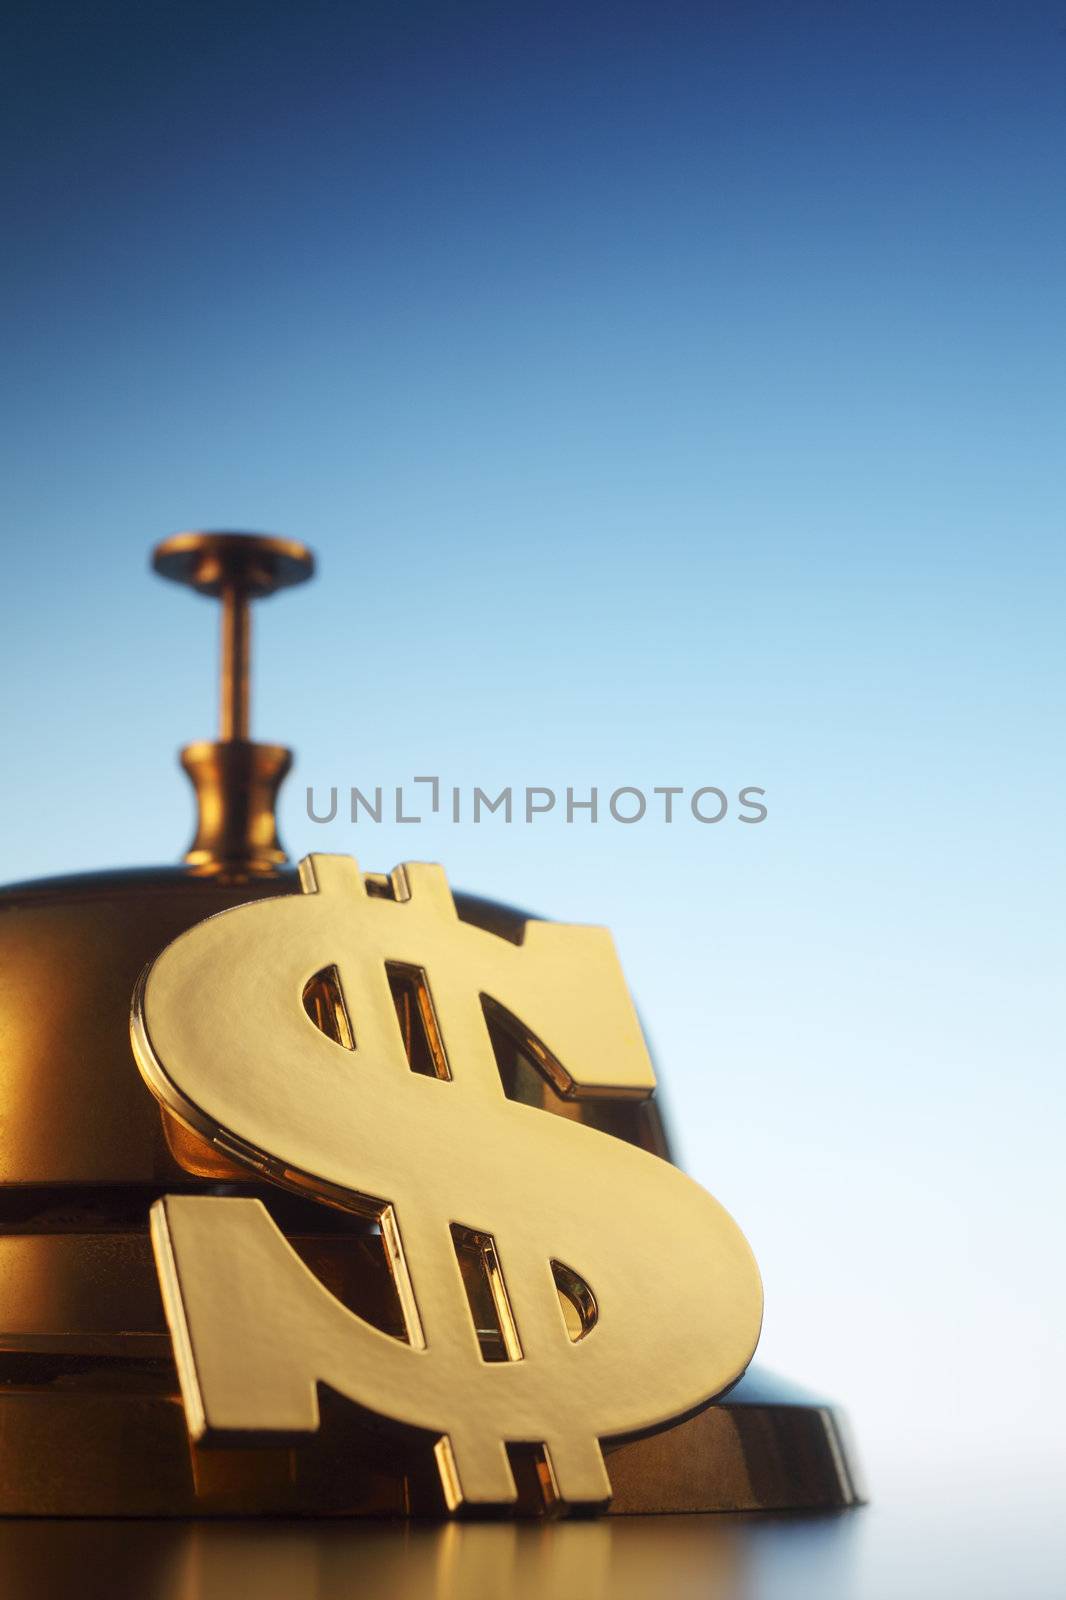 stock image of the dollar sign by the service bell